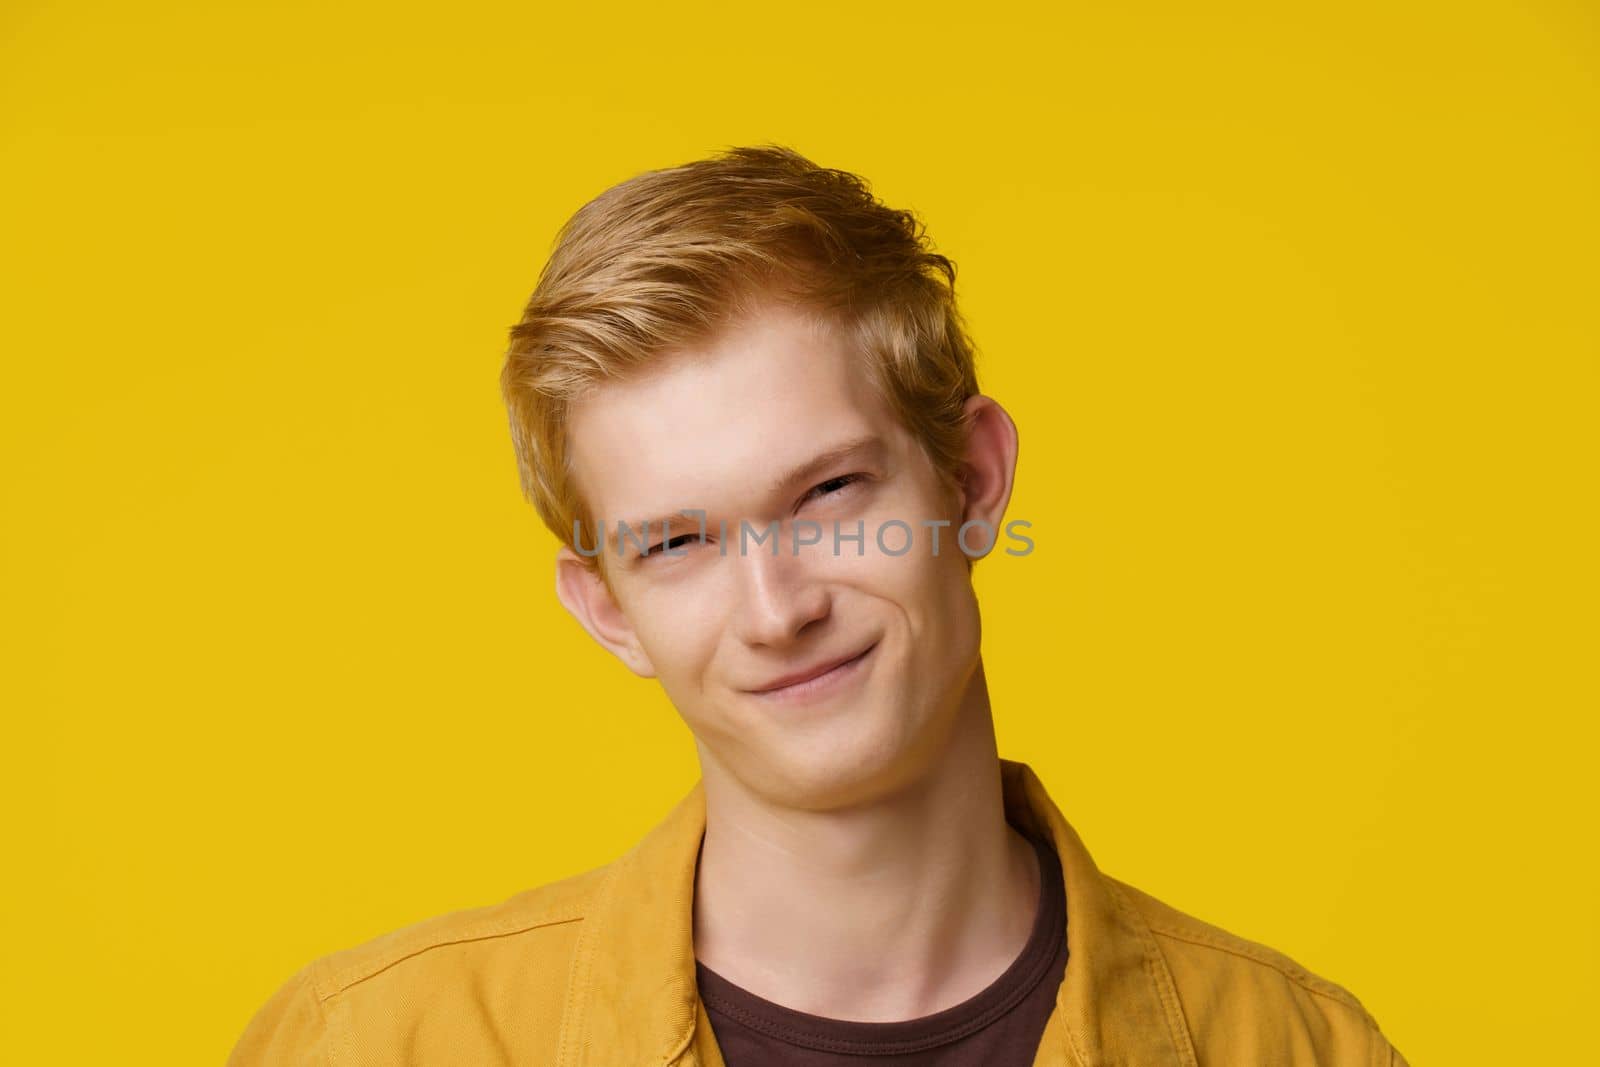 Emotion of Cunning and Deception Concept. A European Young Man shows an Emotion of Cunning and Distrust on a Yellow Background. High quality photo